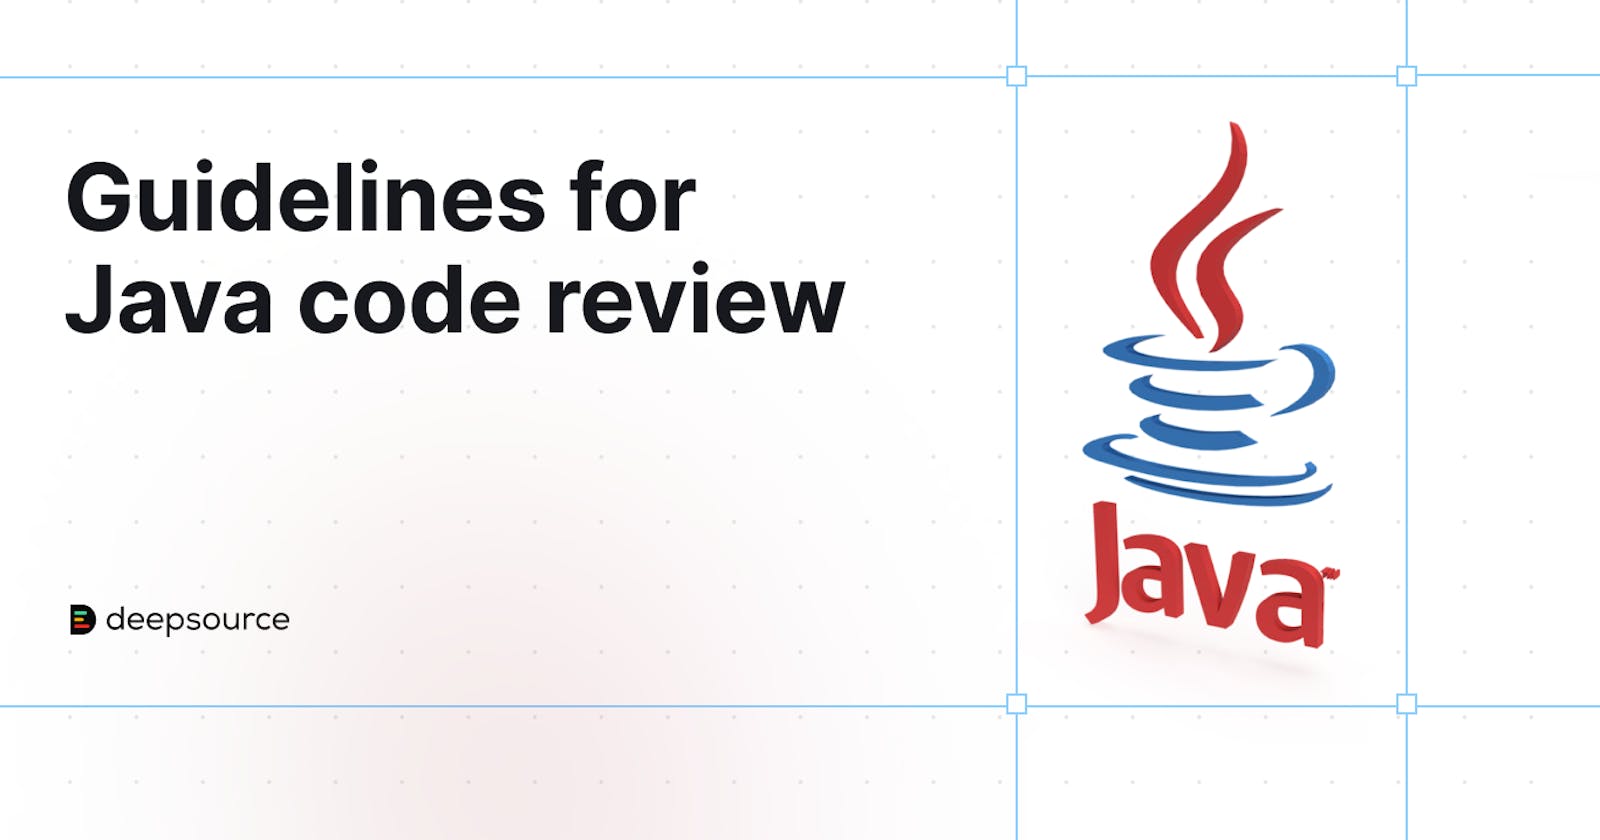 Guidelines for Java code reviews